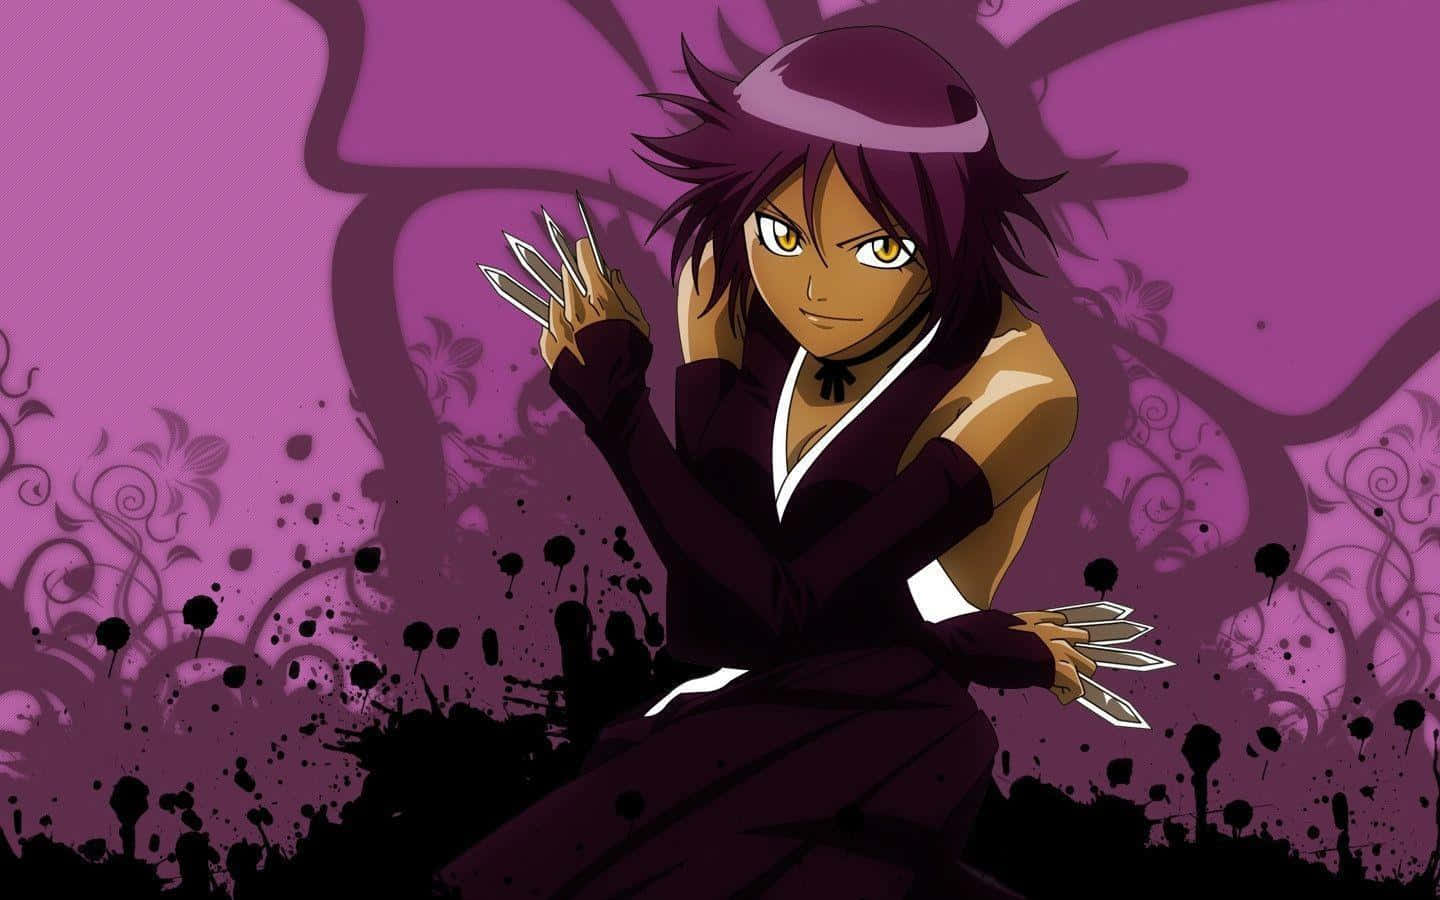 Yoruichi Shihoin, the Former Captain of the 2nd Division of the Gotei 13 Wallpaper